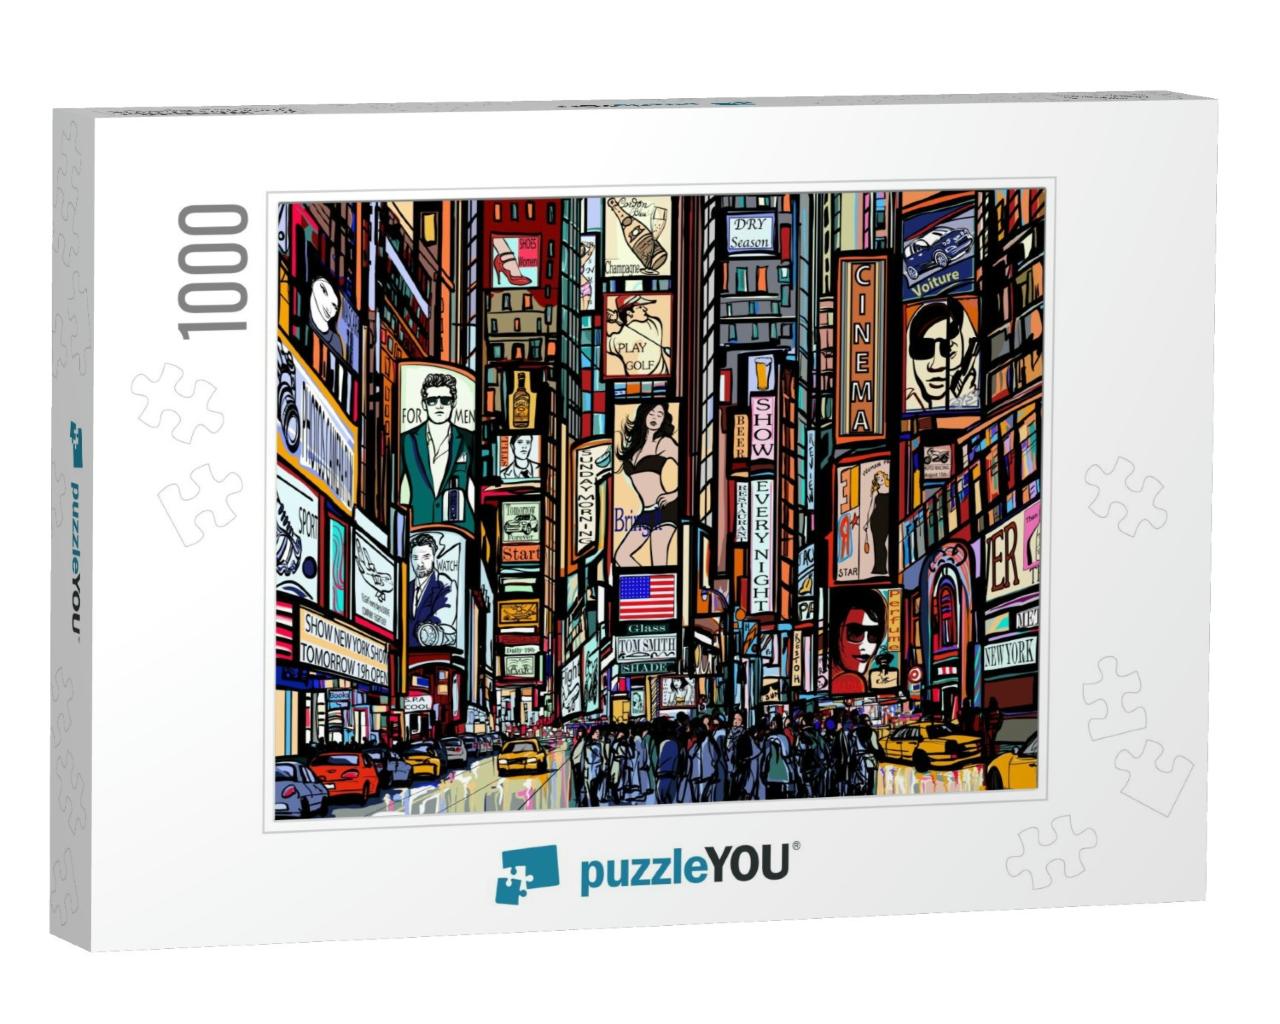 Illustration of a Street in New York City - Times Square... Jigsaw Puzzle with 1000 pieces